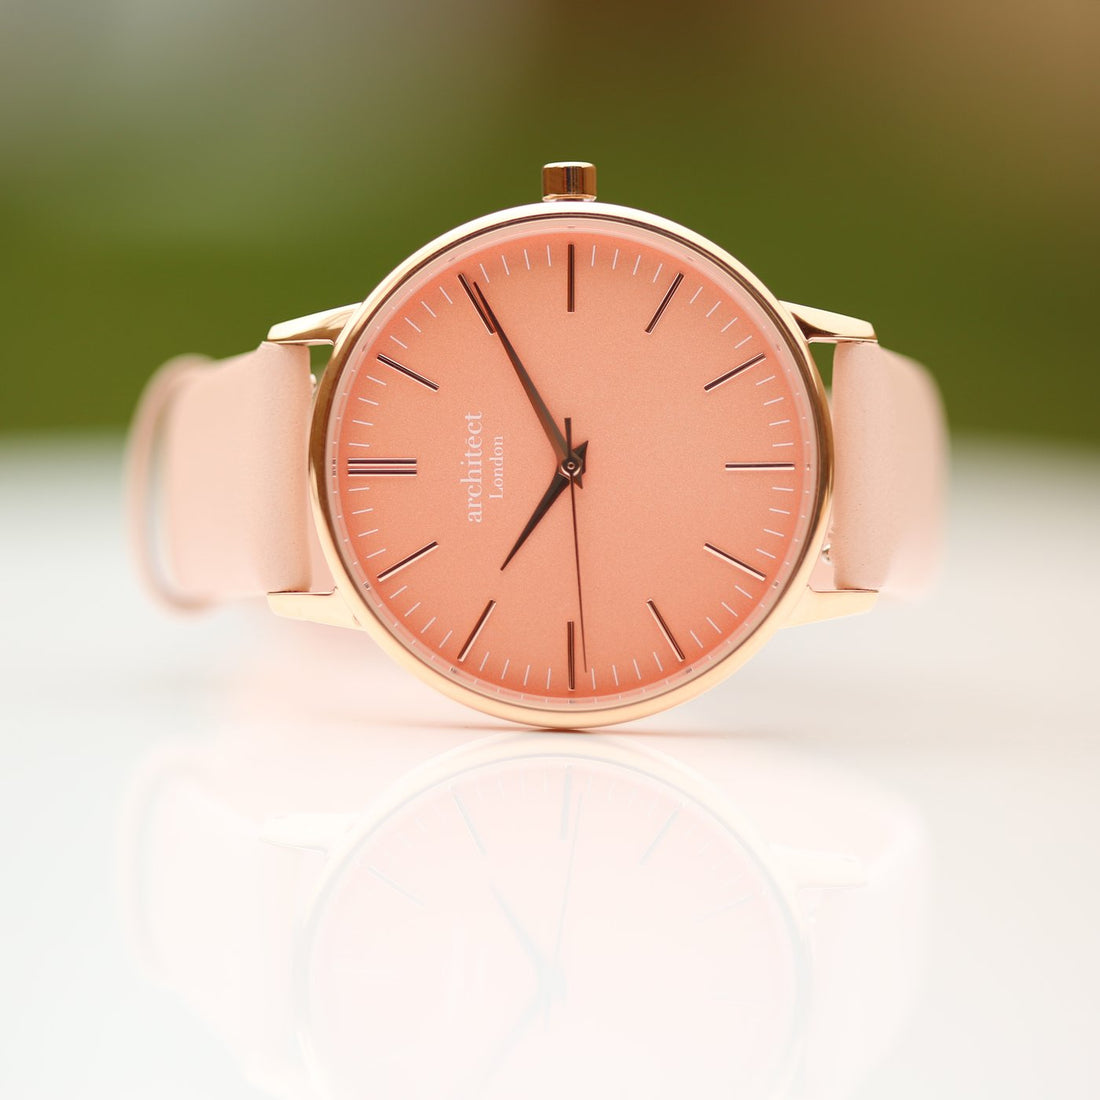  Women's Personalised Engraved Coral Watch. Leather strap. Stainless steel case. Water Resistant: 3 ATM